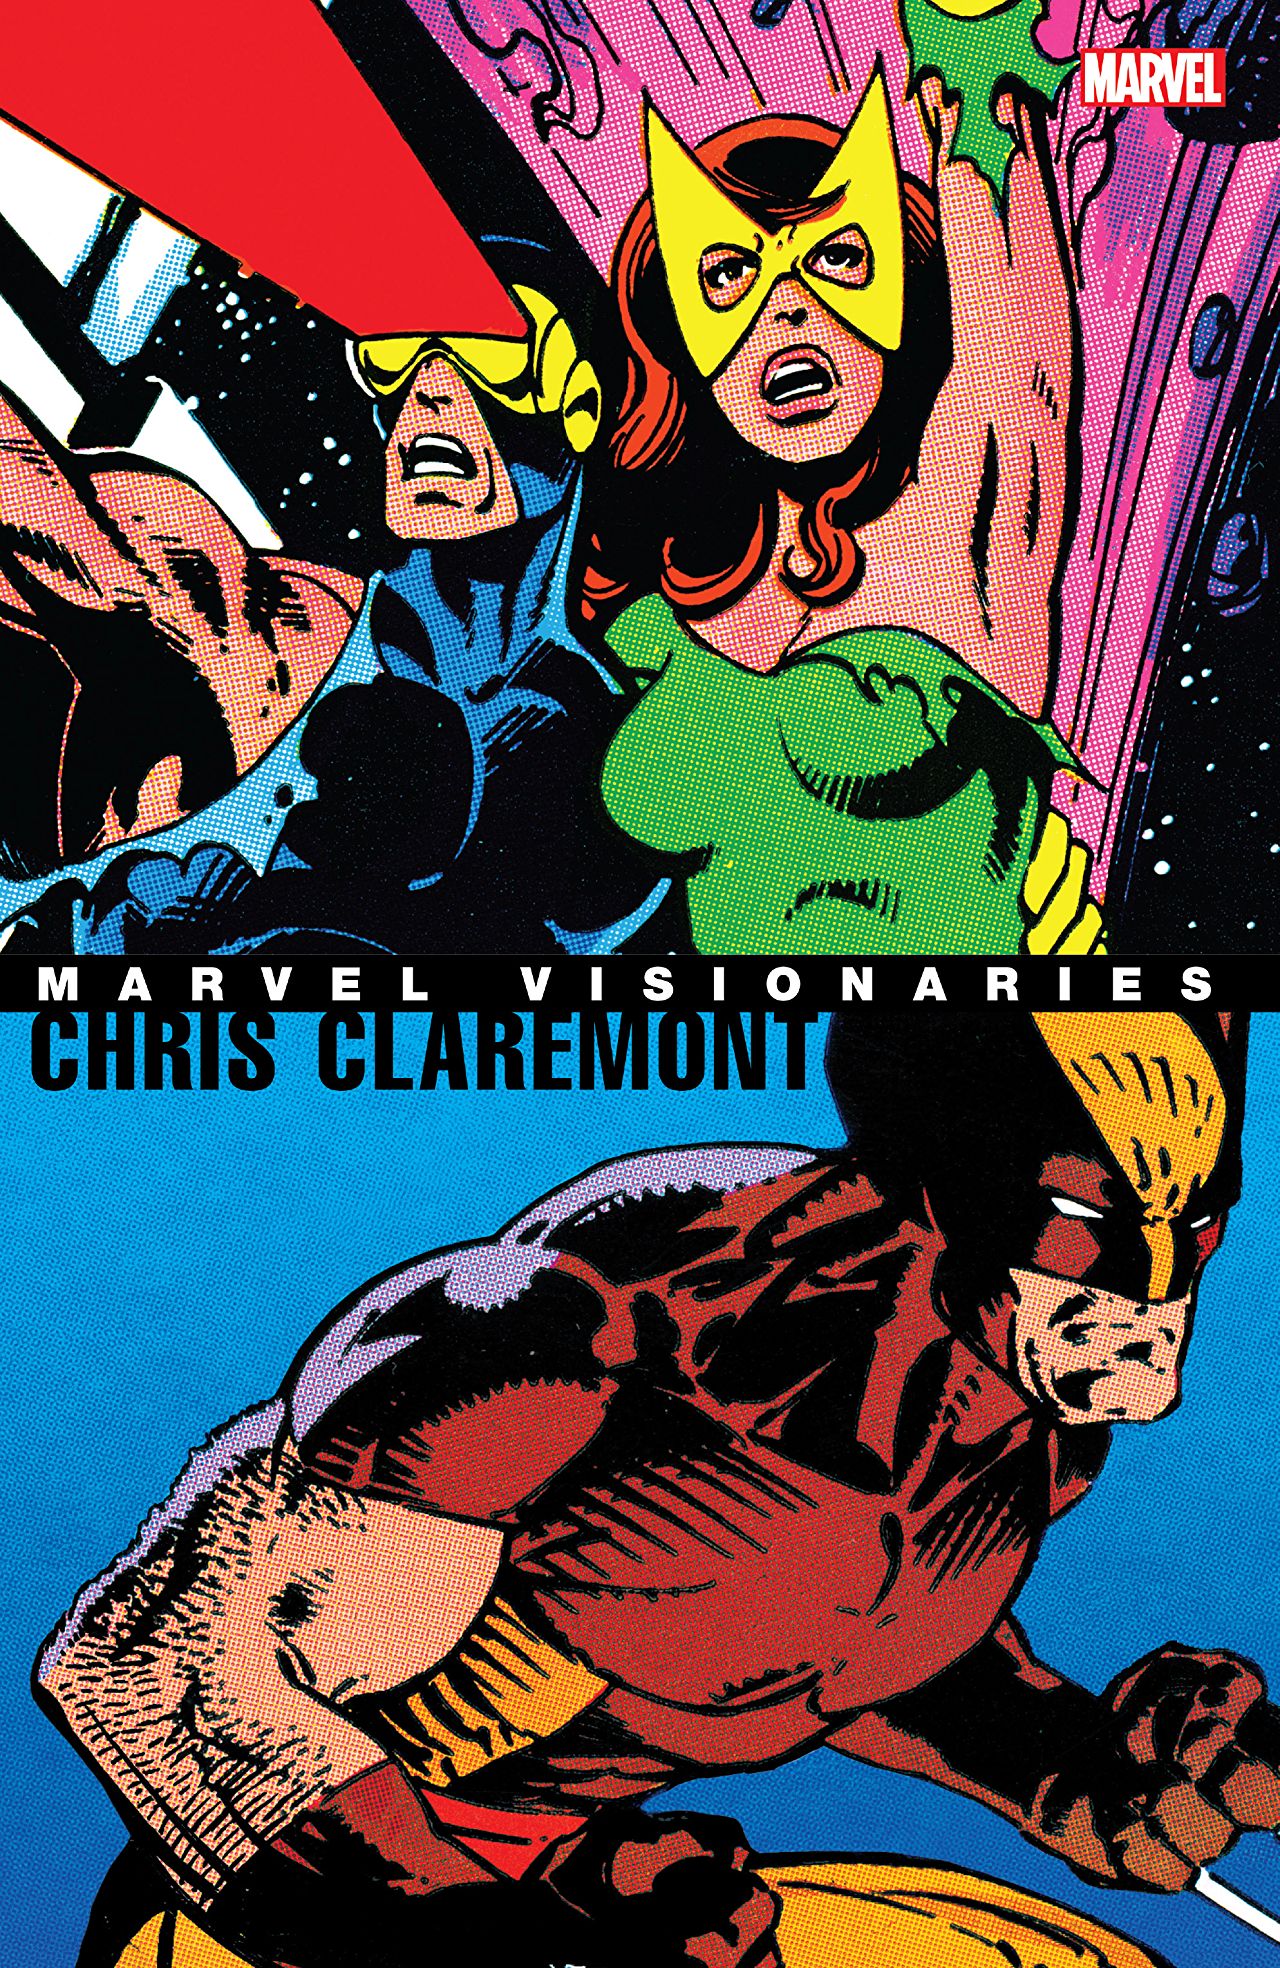 Marvel Visionaries: Chris Claremont review - Several classics in an affordable package